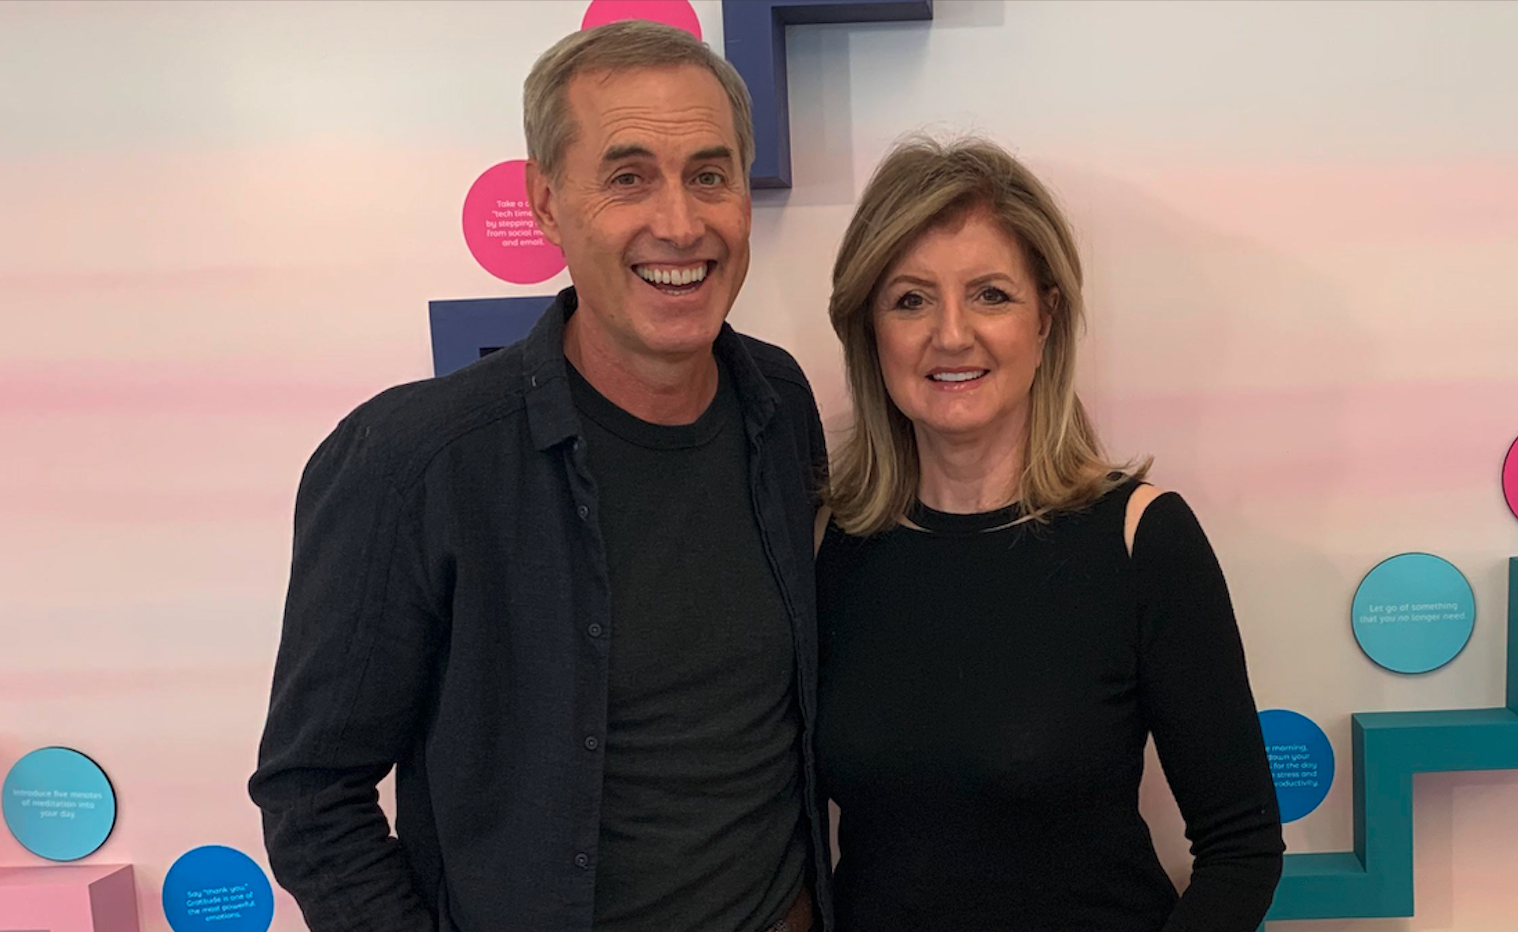 B.J. Fogg and Arianna Huffington in front of Thrive’s Microstep Wall.